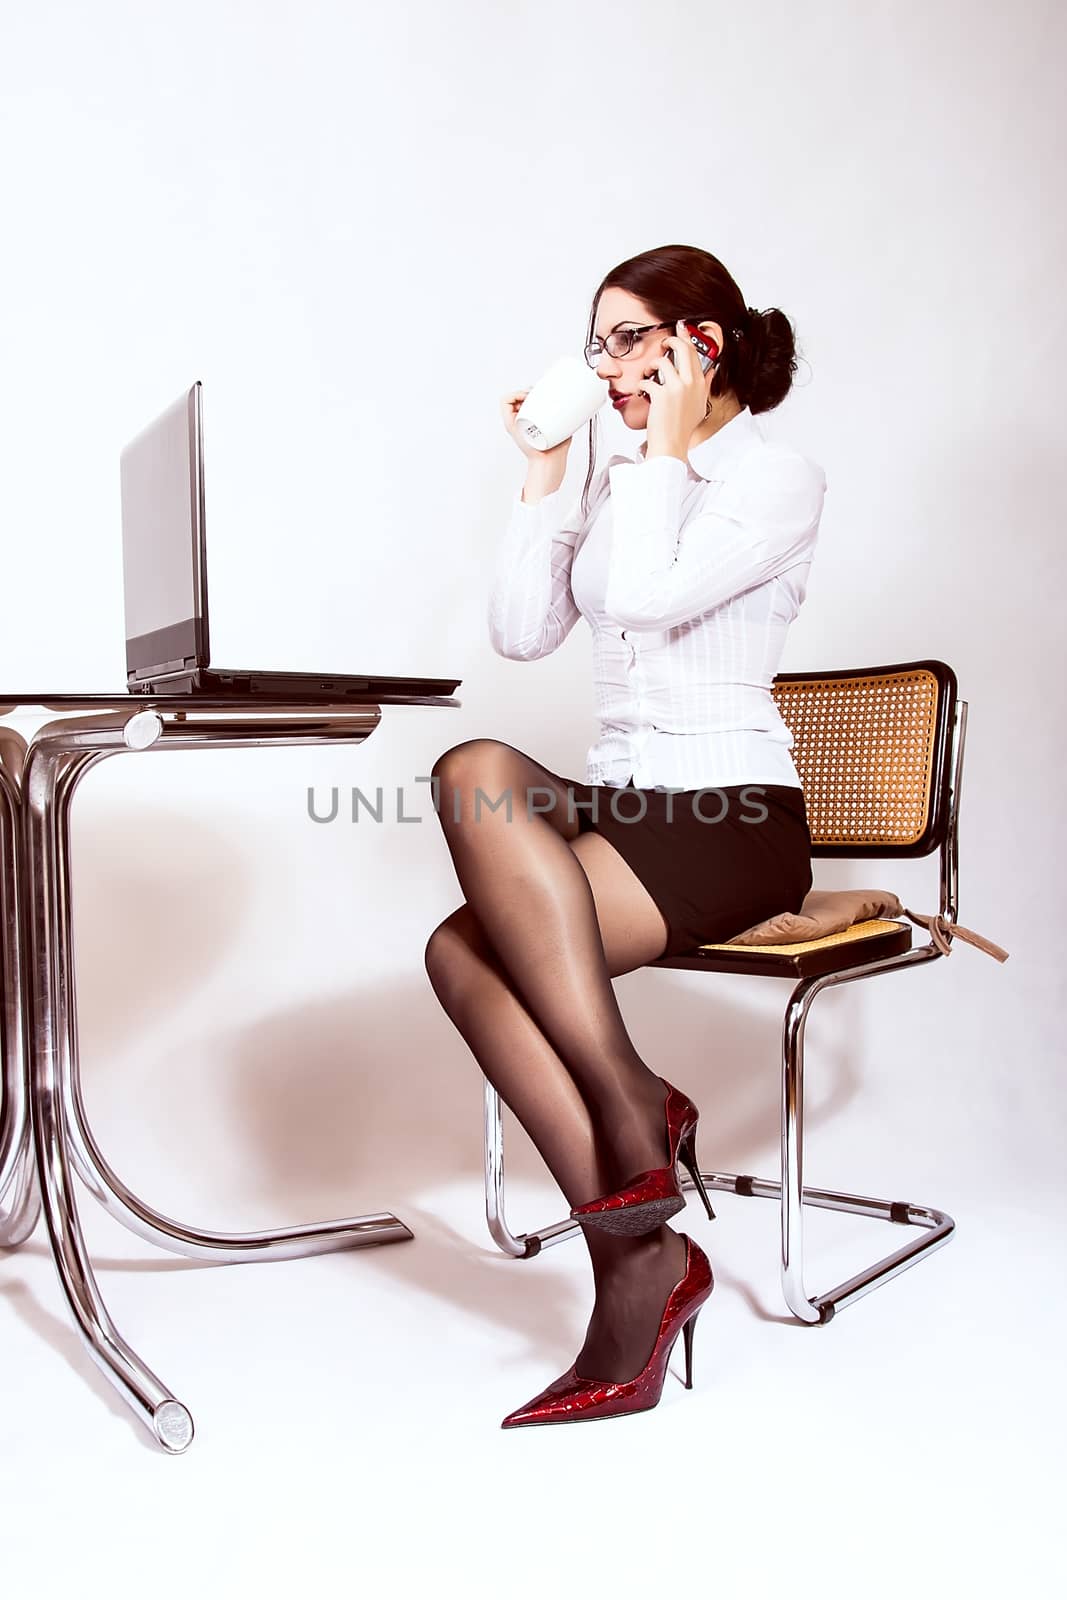 portrait of businesswoman sitting at desk working on a computer